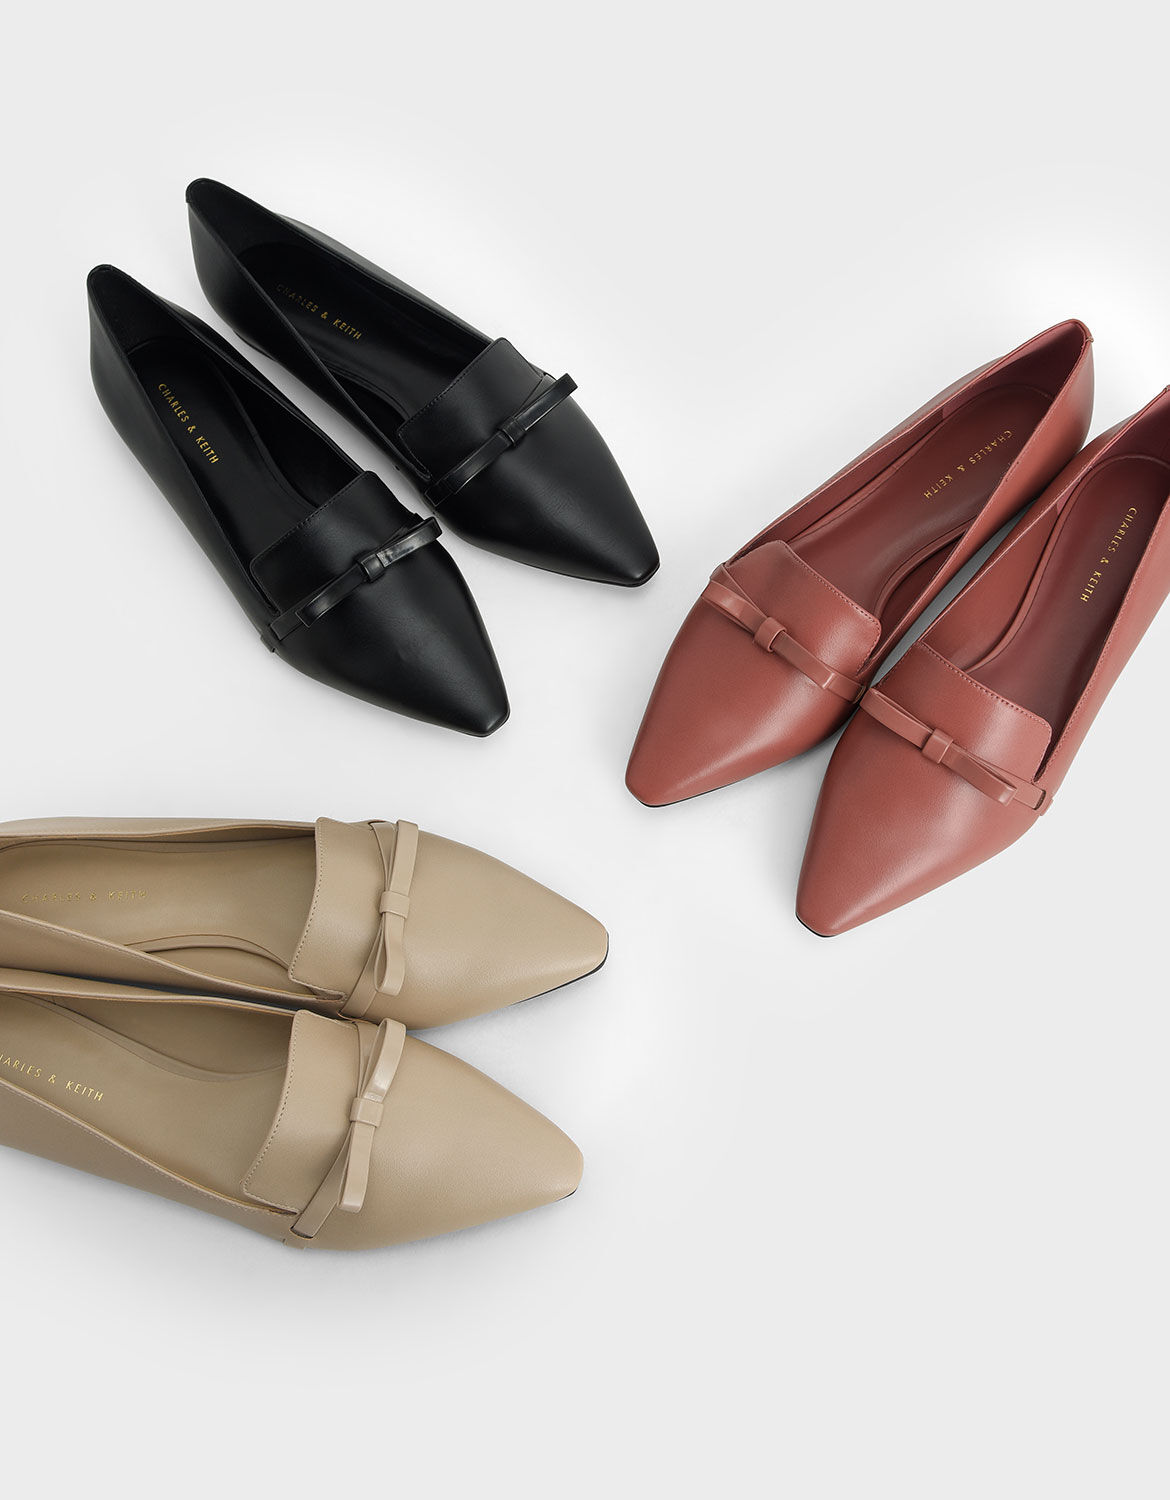 charles and keith shoes